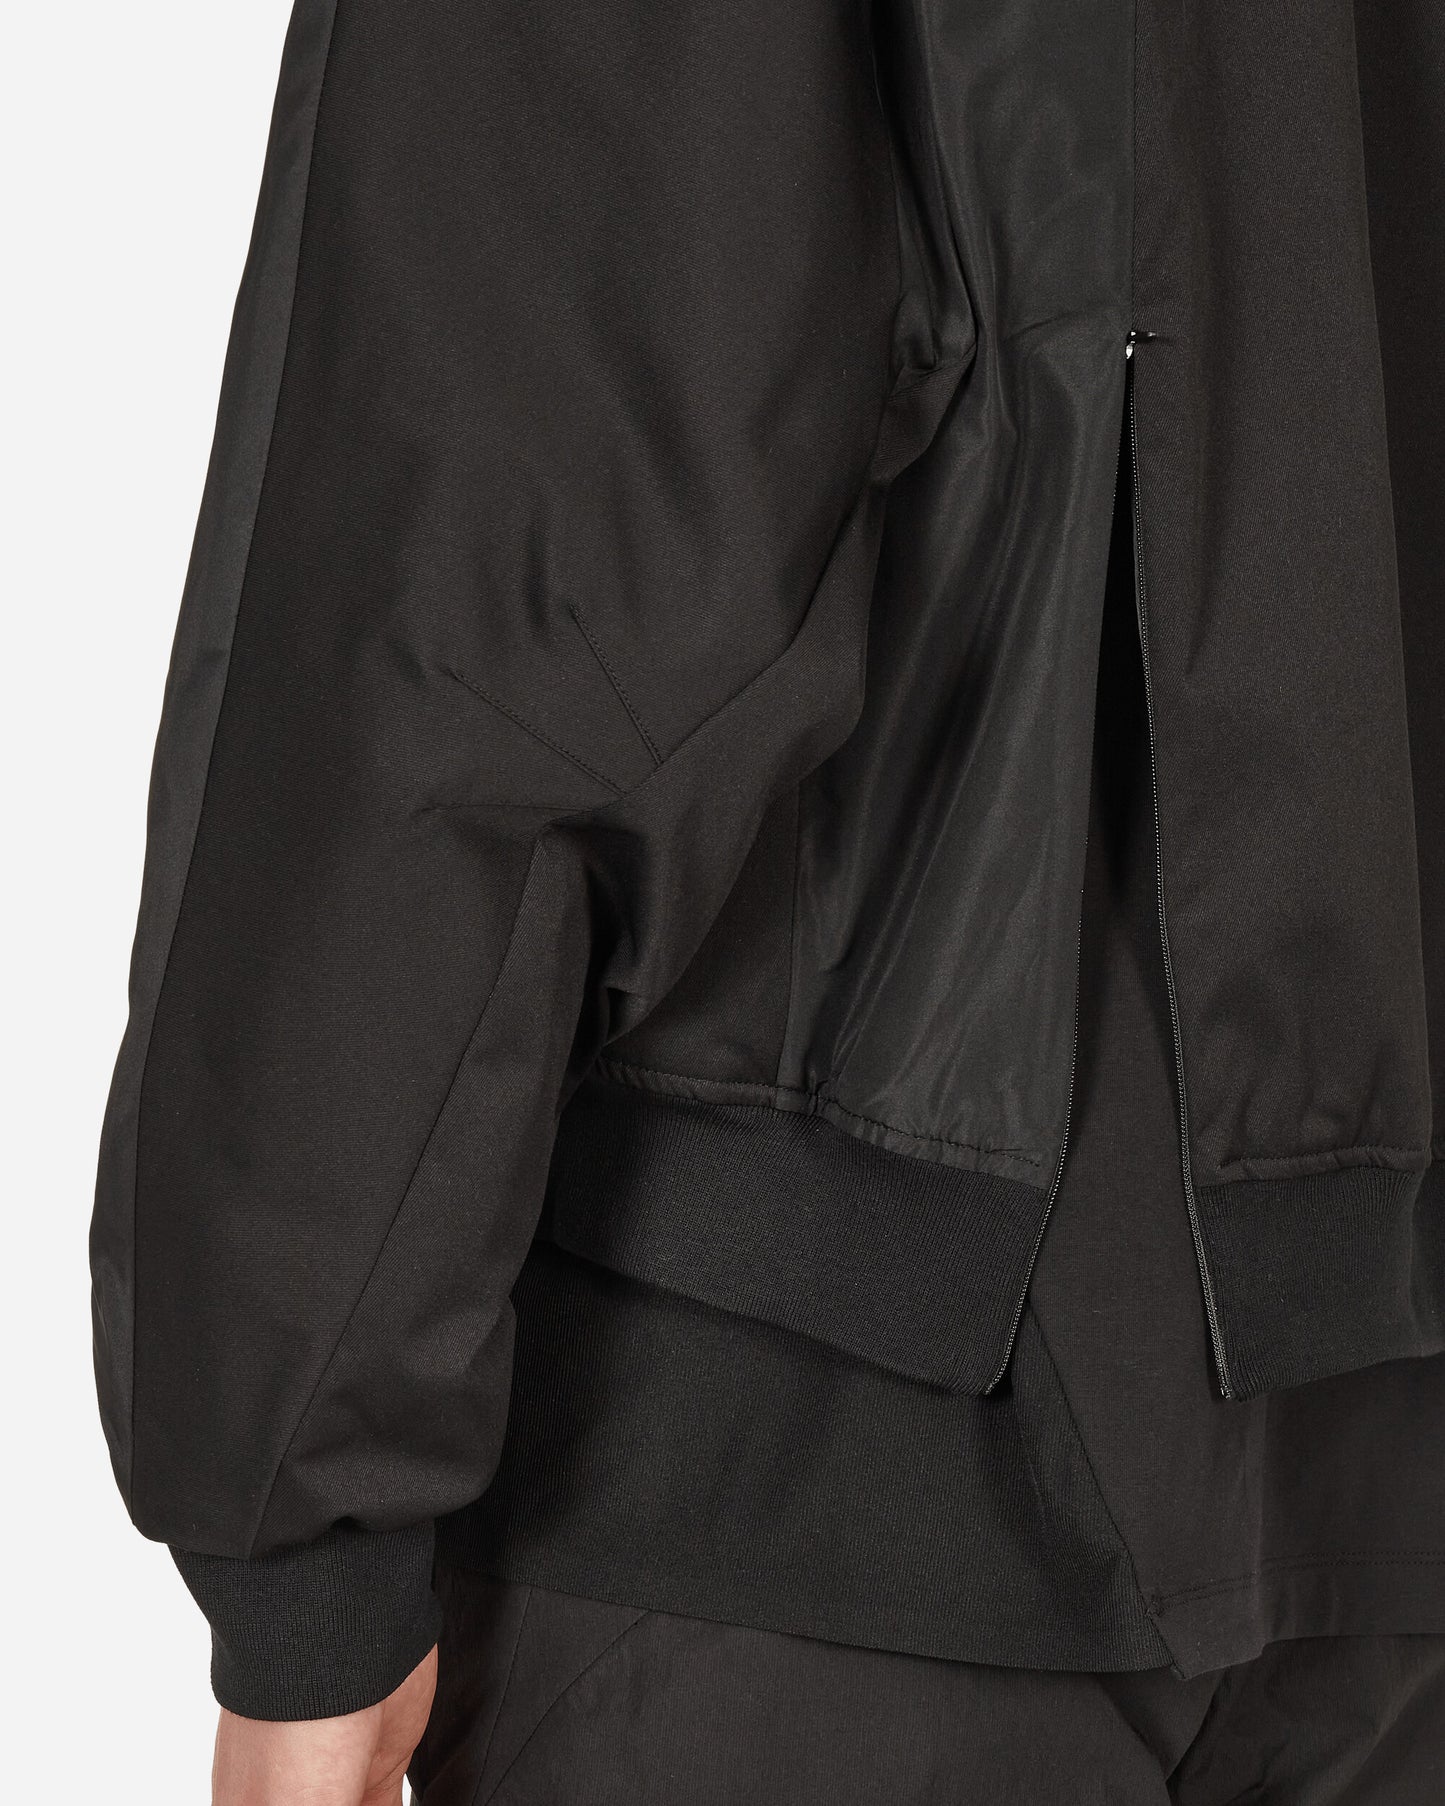 Post Archive Faction (PAF) 6.0 Bomber Center Black Coats and Jackets Bomber Jackets 60OBCB  BLACK 